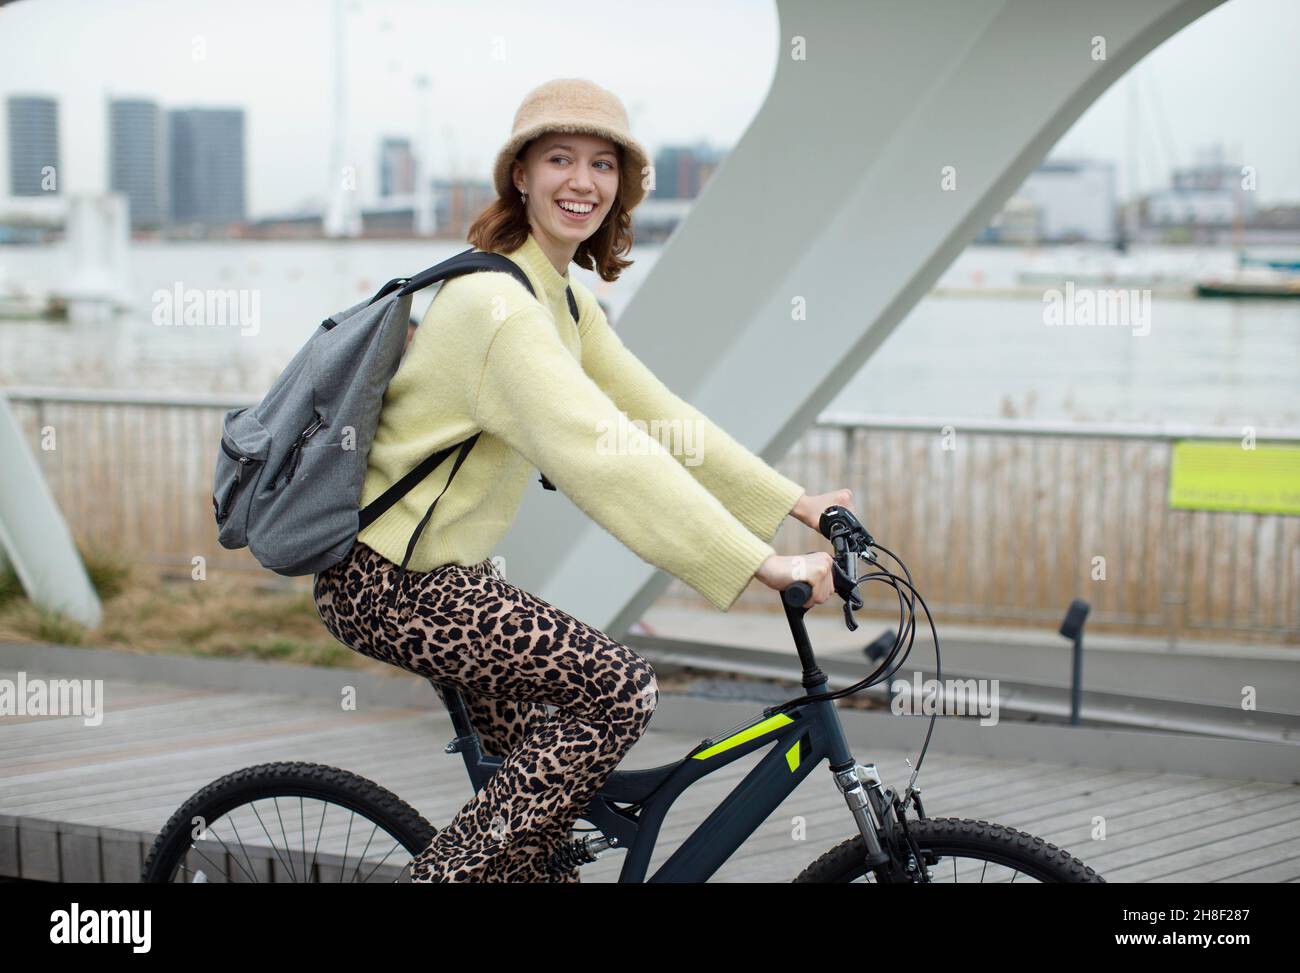 Portrait stylish young woman riding bicycle in city Stock Photo